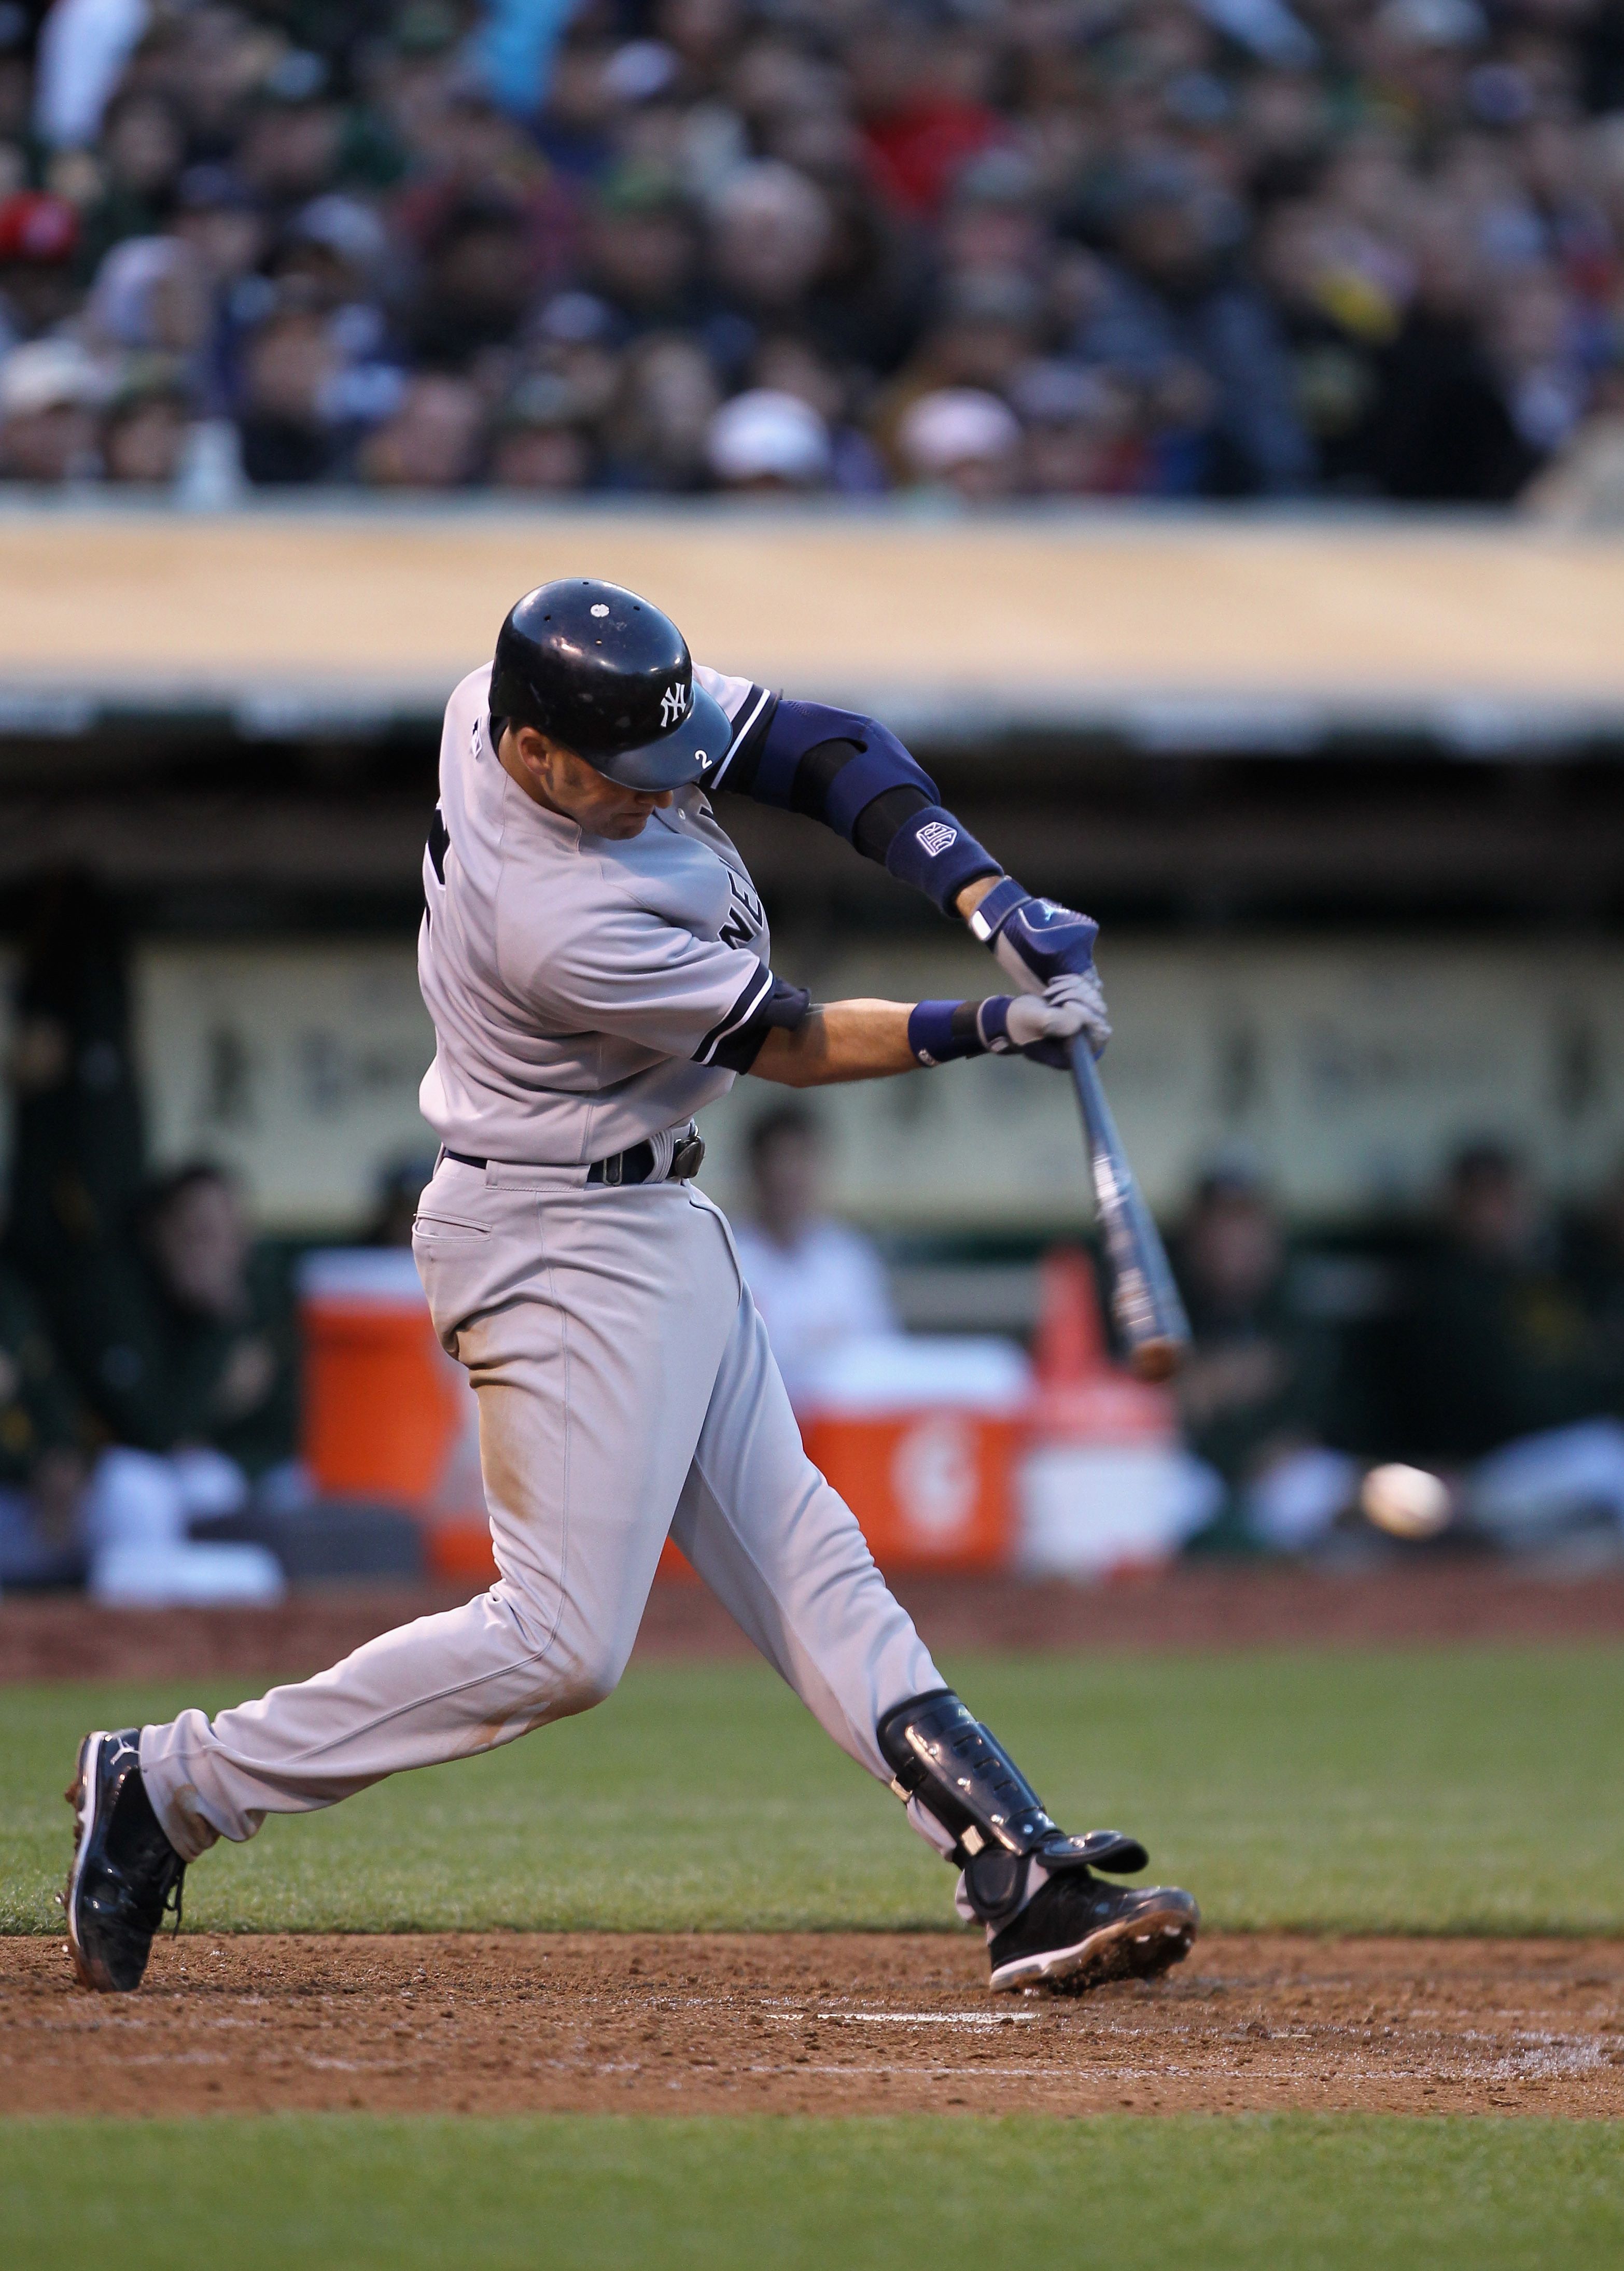 Jeter Takes On-Field Batting Practice For 1st Time Since Season Was Cut  Short - CBS New York